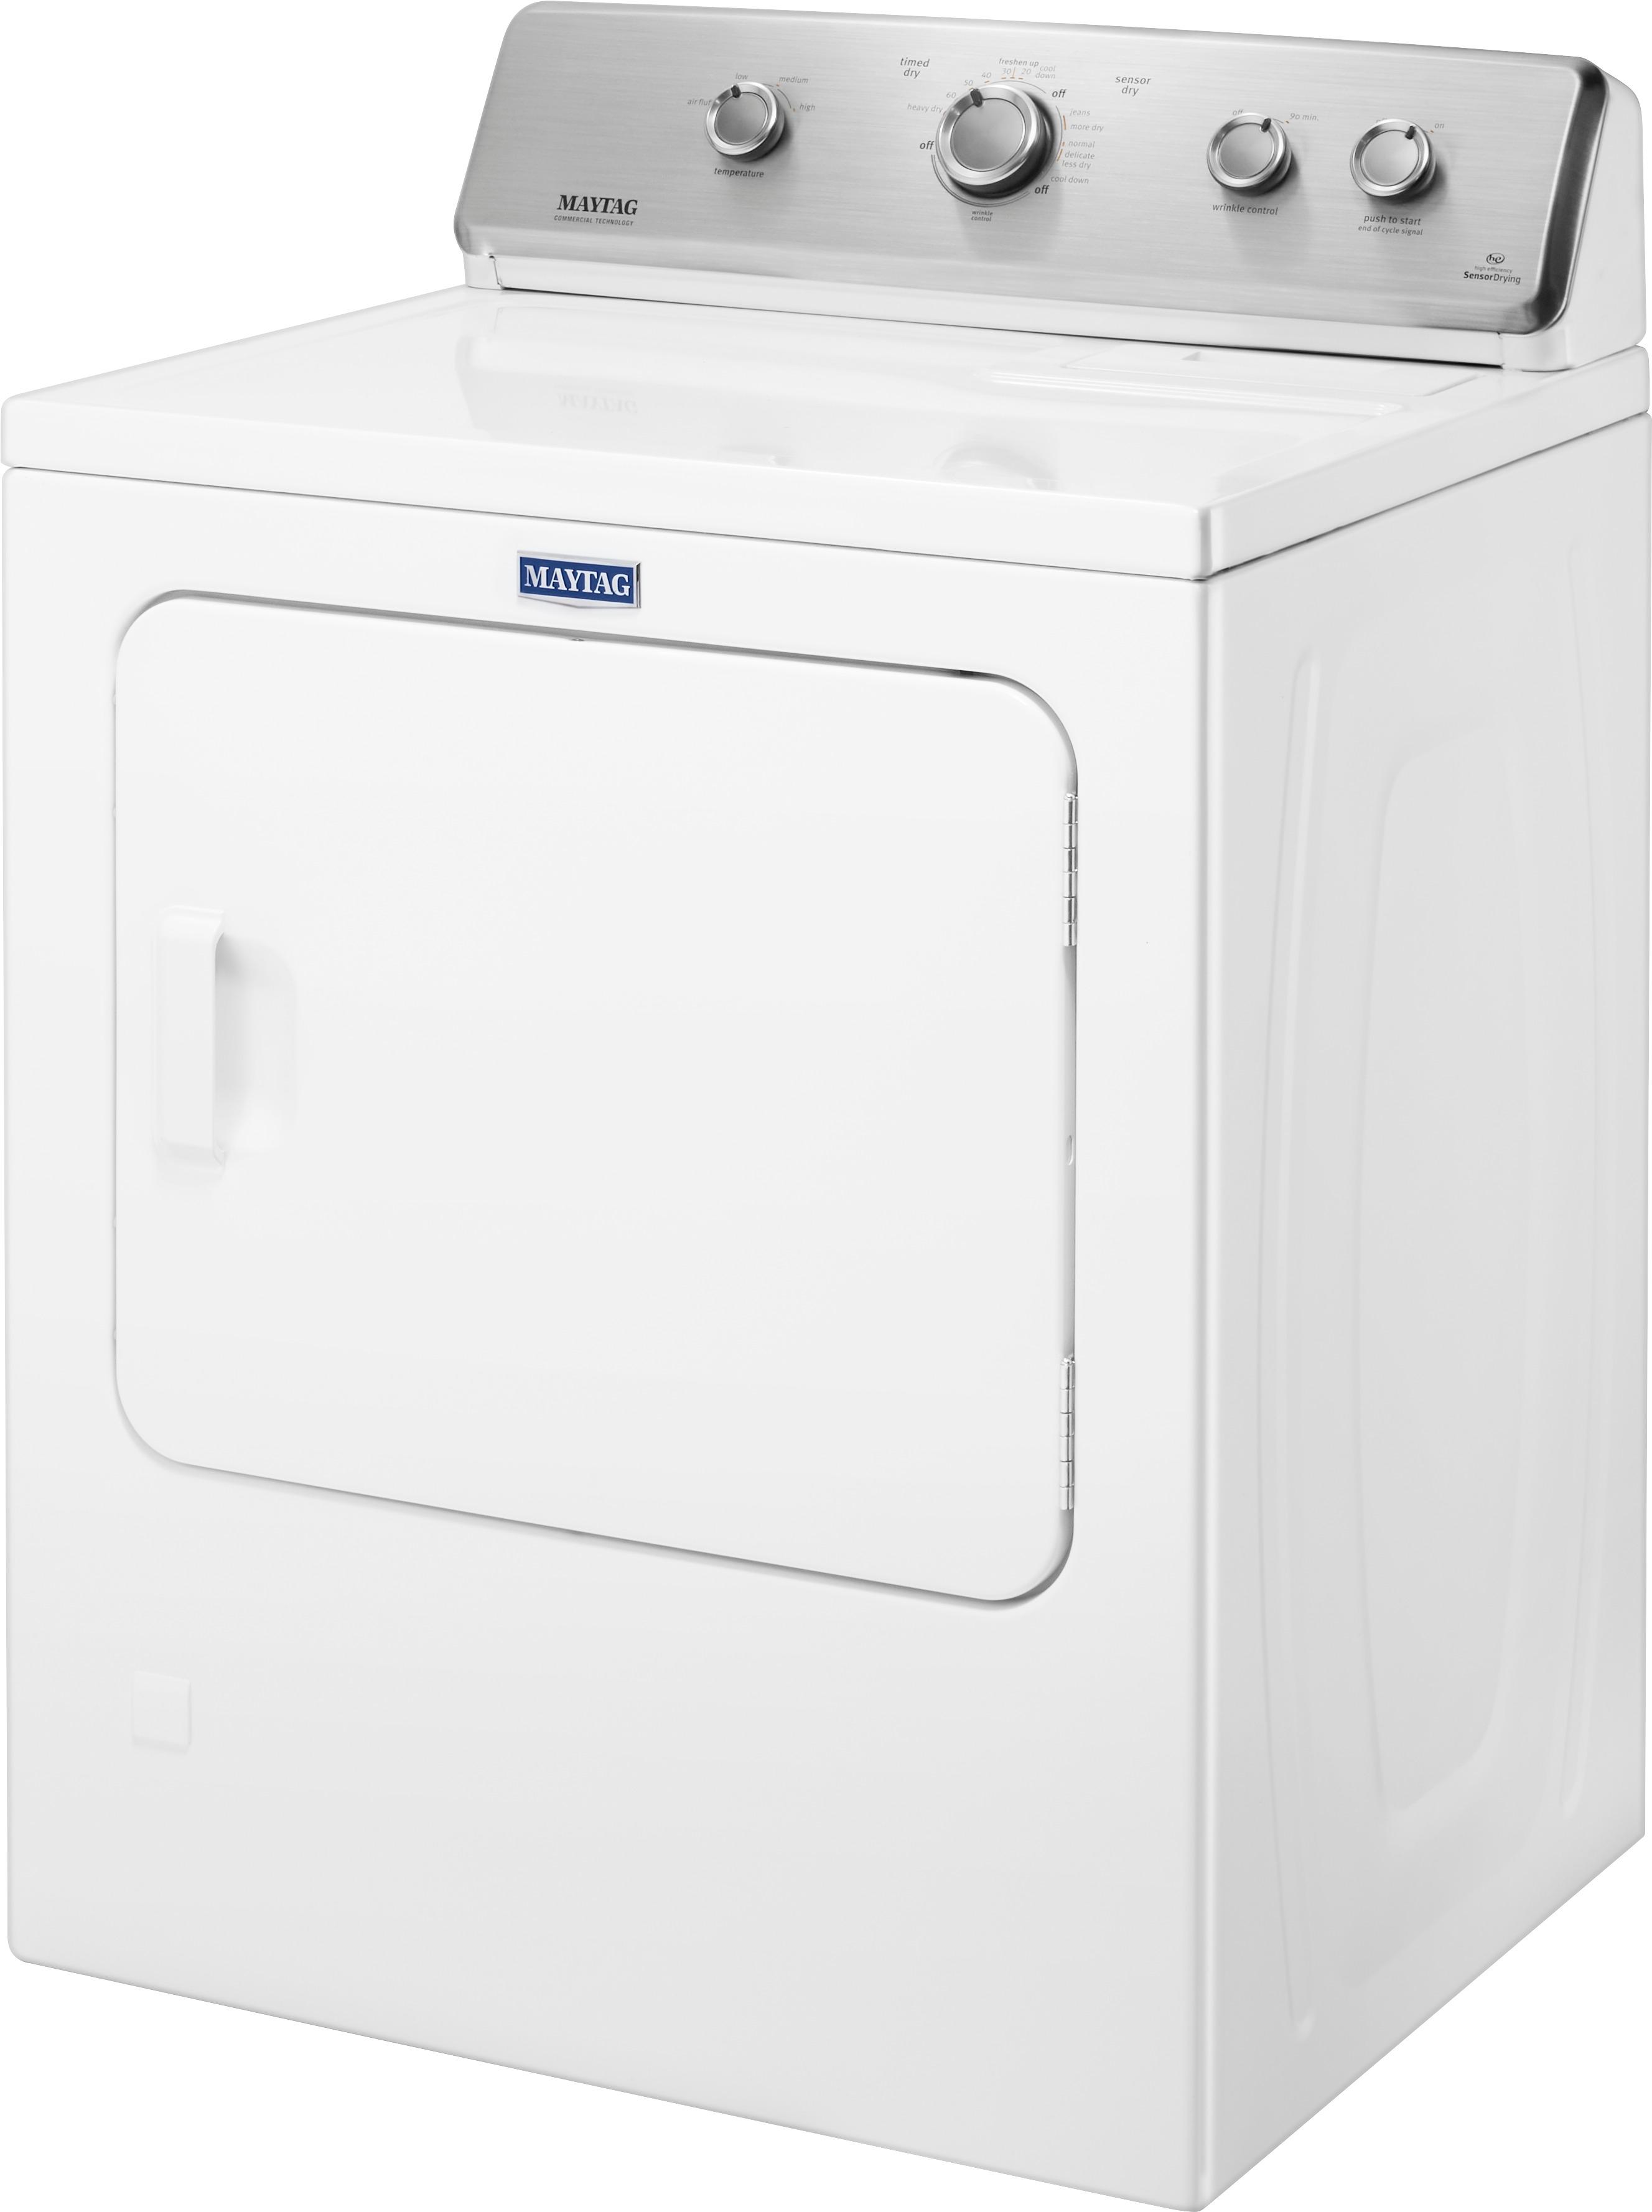 Maytag 7.0 Cu. Ft. Electric Dryer with Extra-Large Capacity White MEDX655DW  - Best Buy